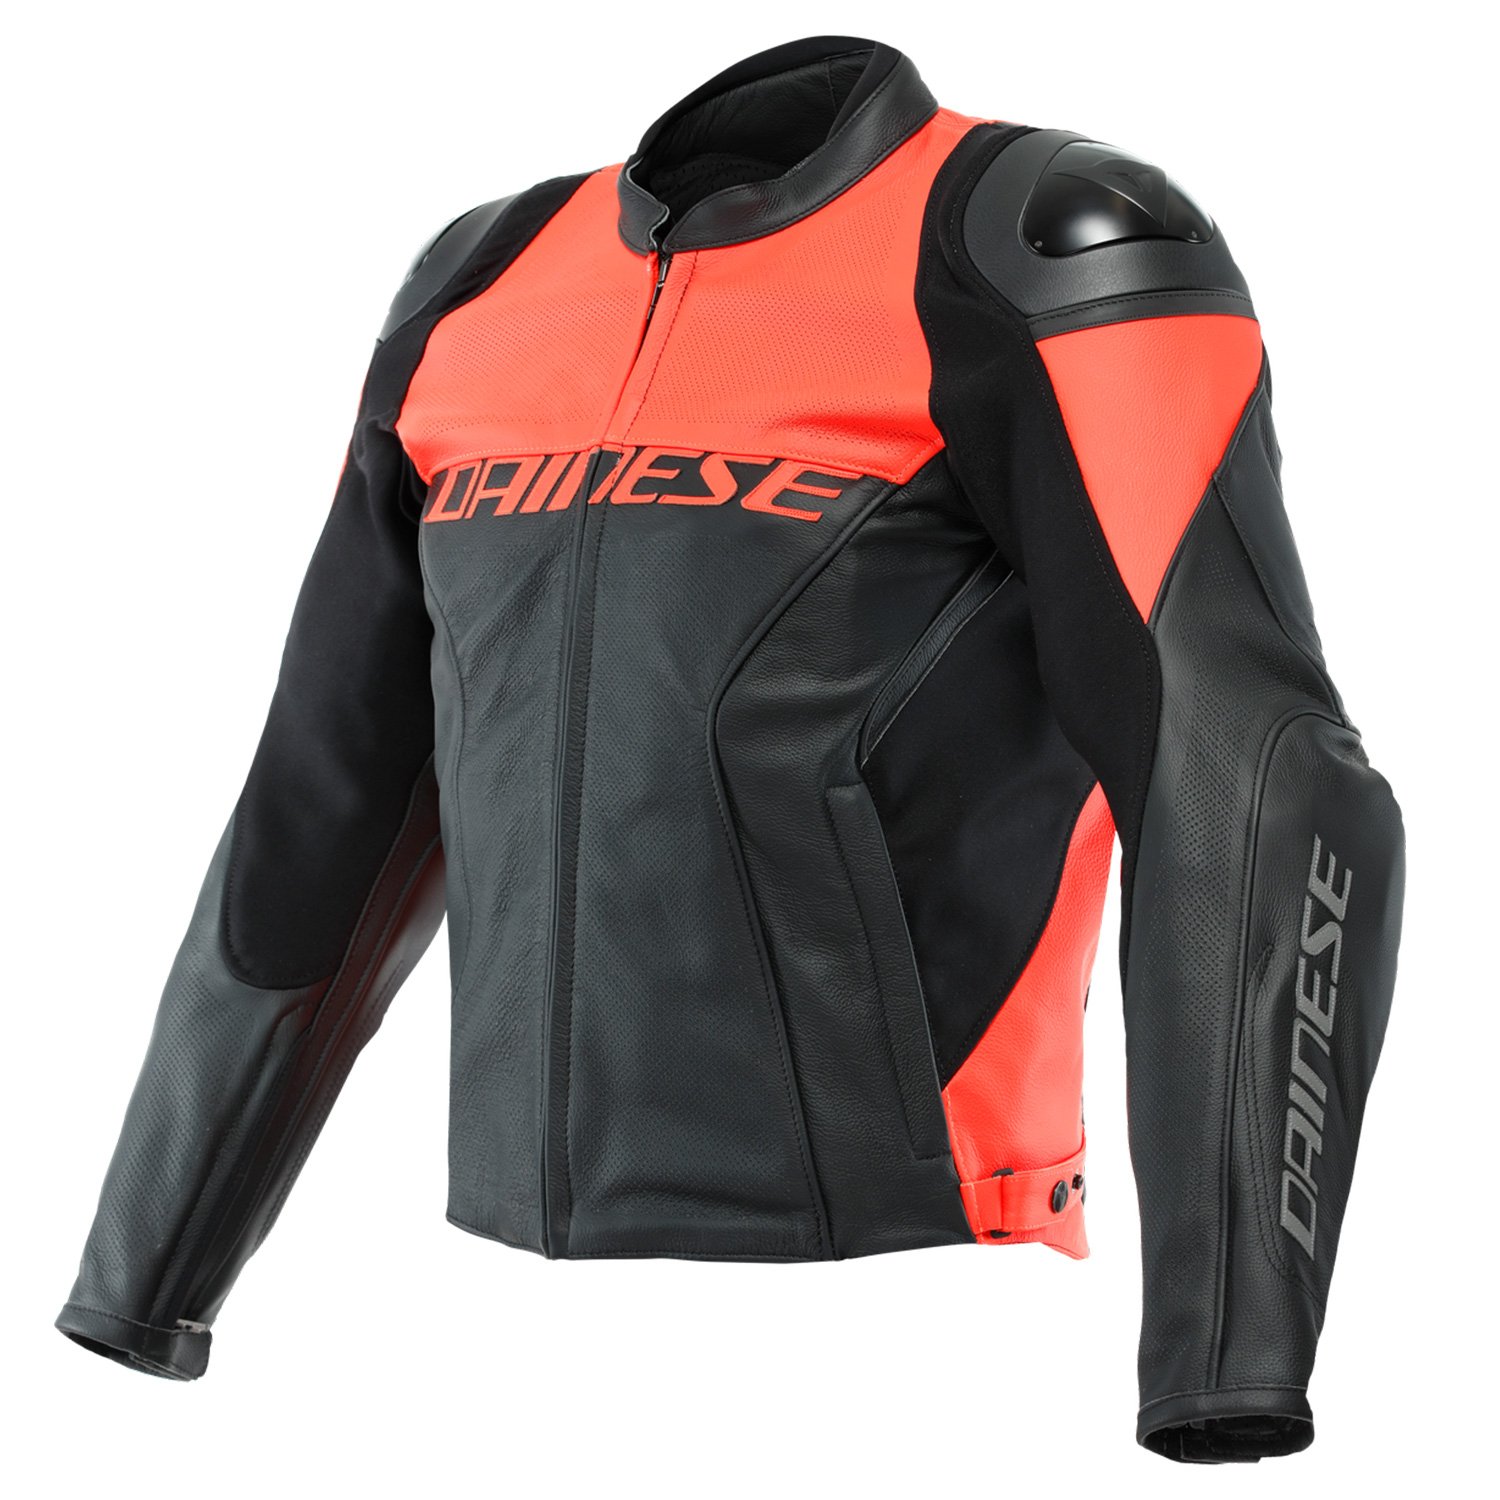 Image of Dainese Racing 4 Perforated Leather Jacket Black Fluo Red Size 52 ID 8051019302946